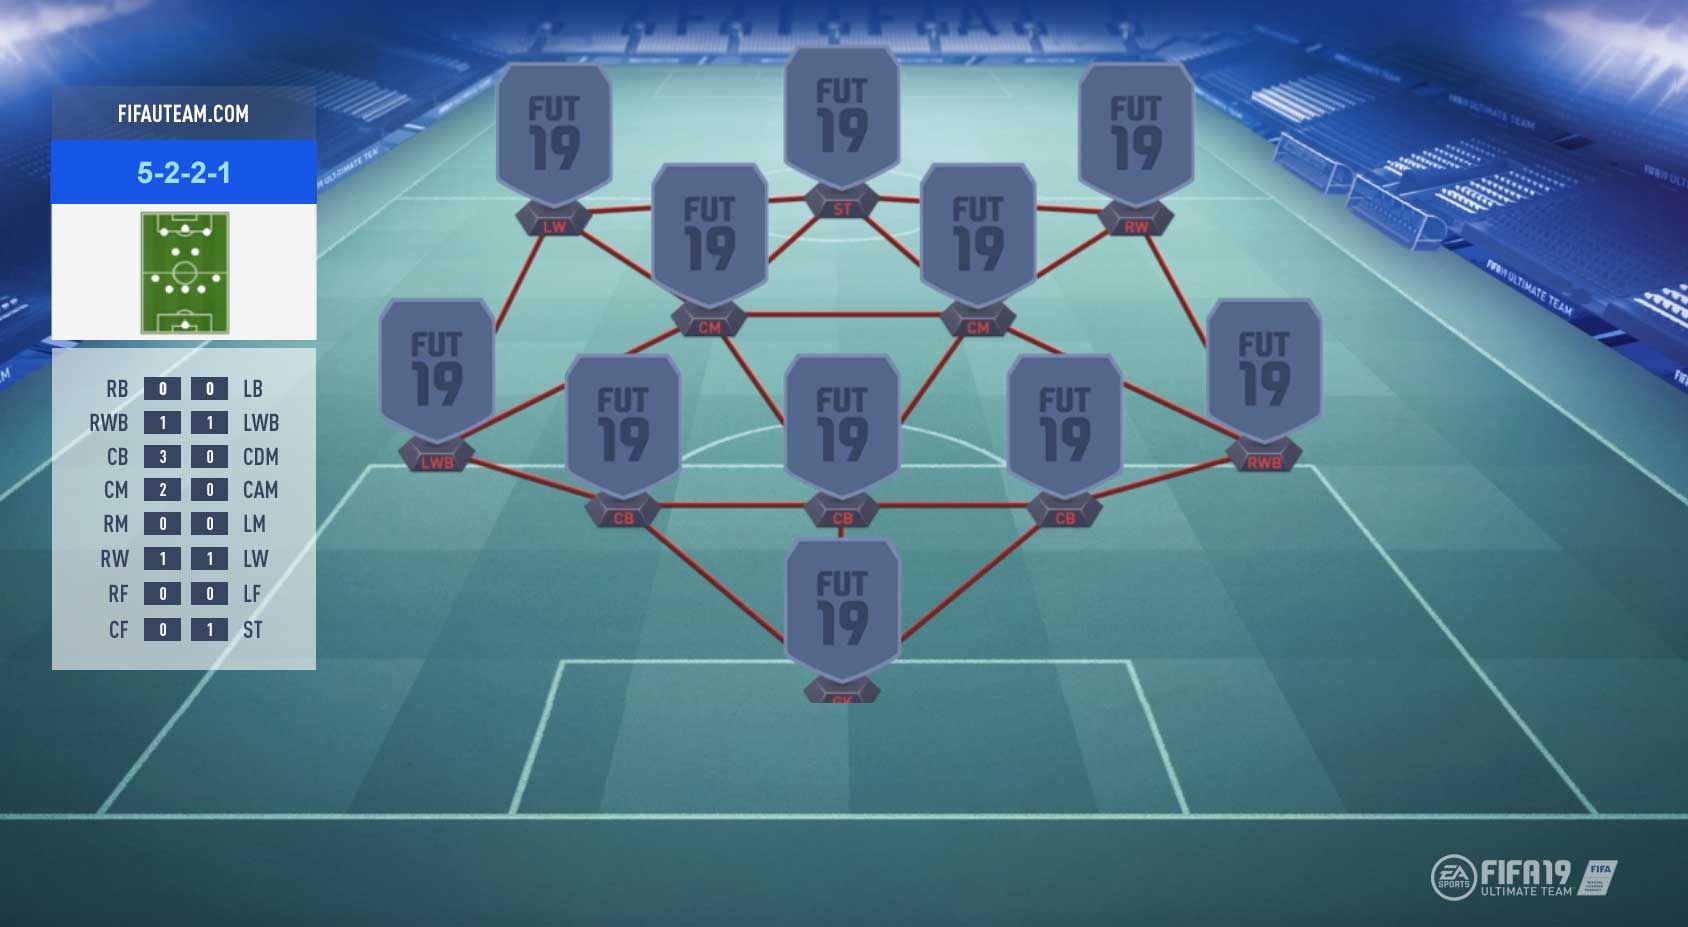 The Best FIFA 19 Formation for FIFA Ultimate Team